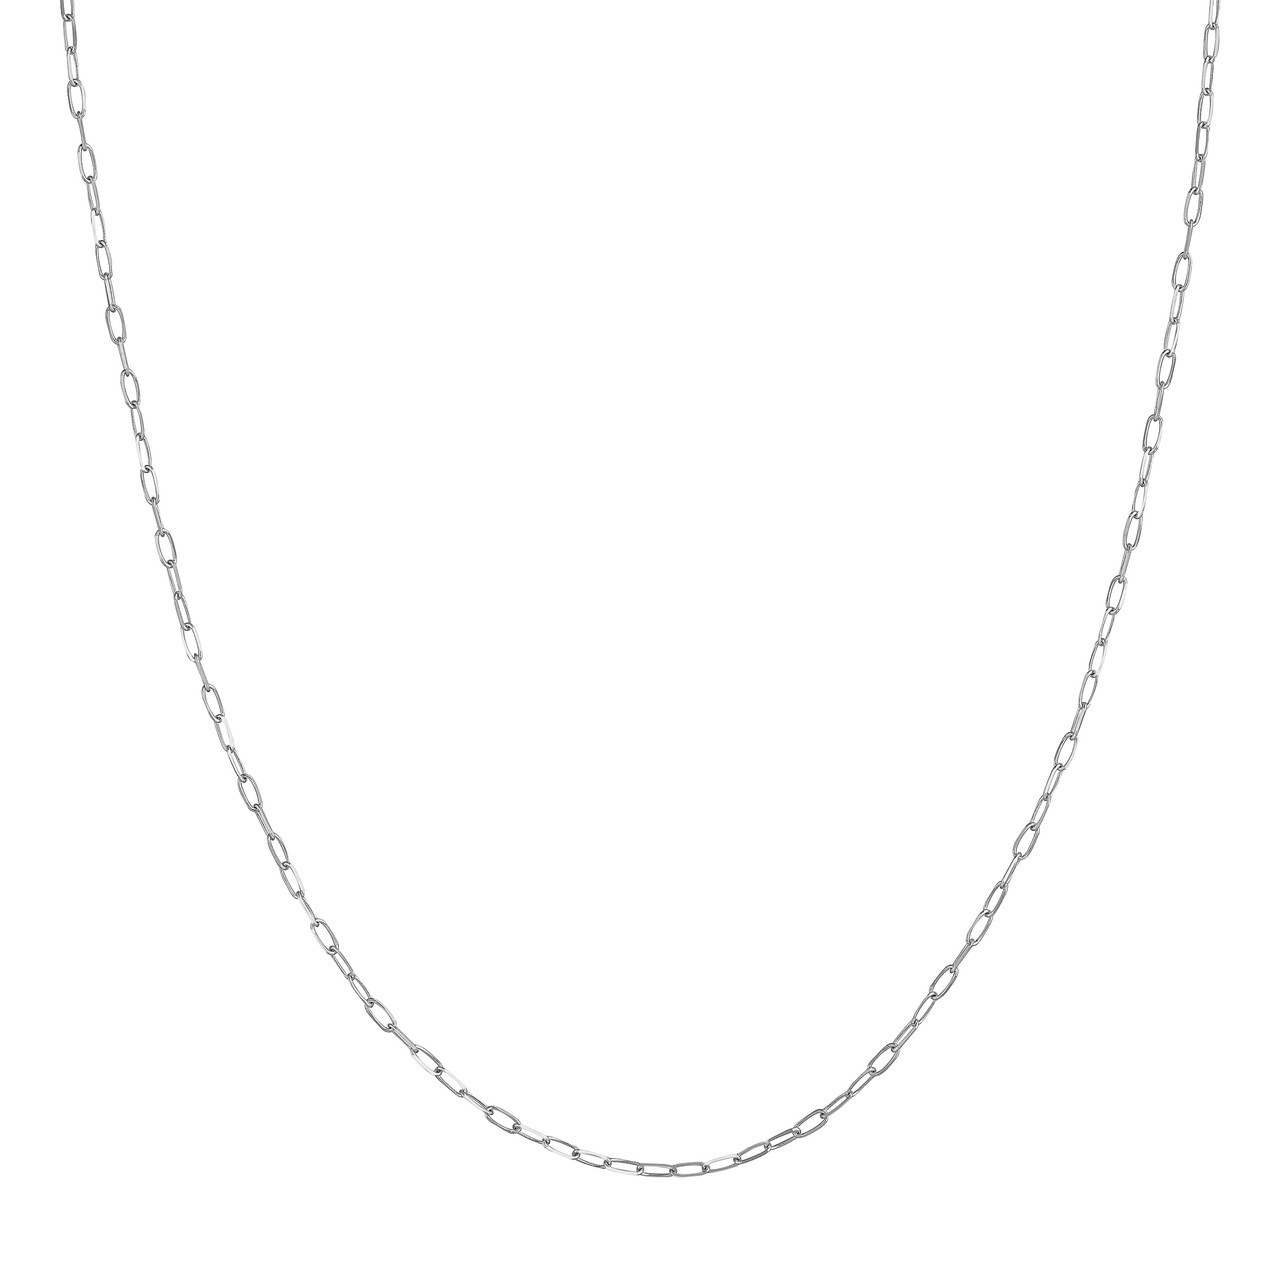 White Gold Solid Petite1.7mm Paperclip Chain l 20 inches